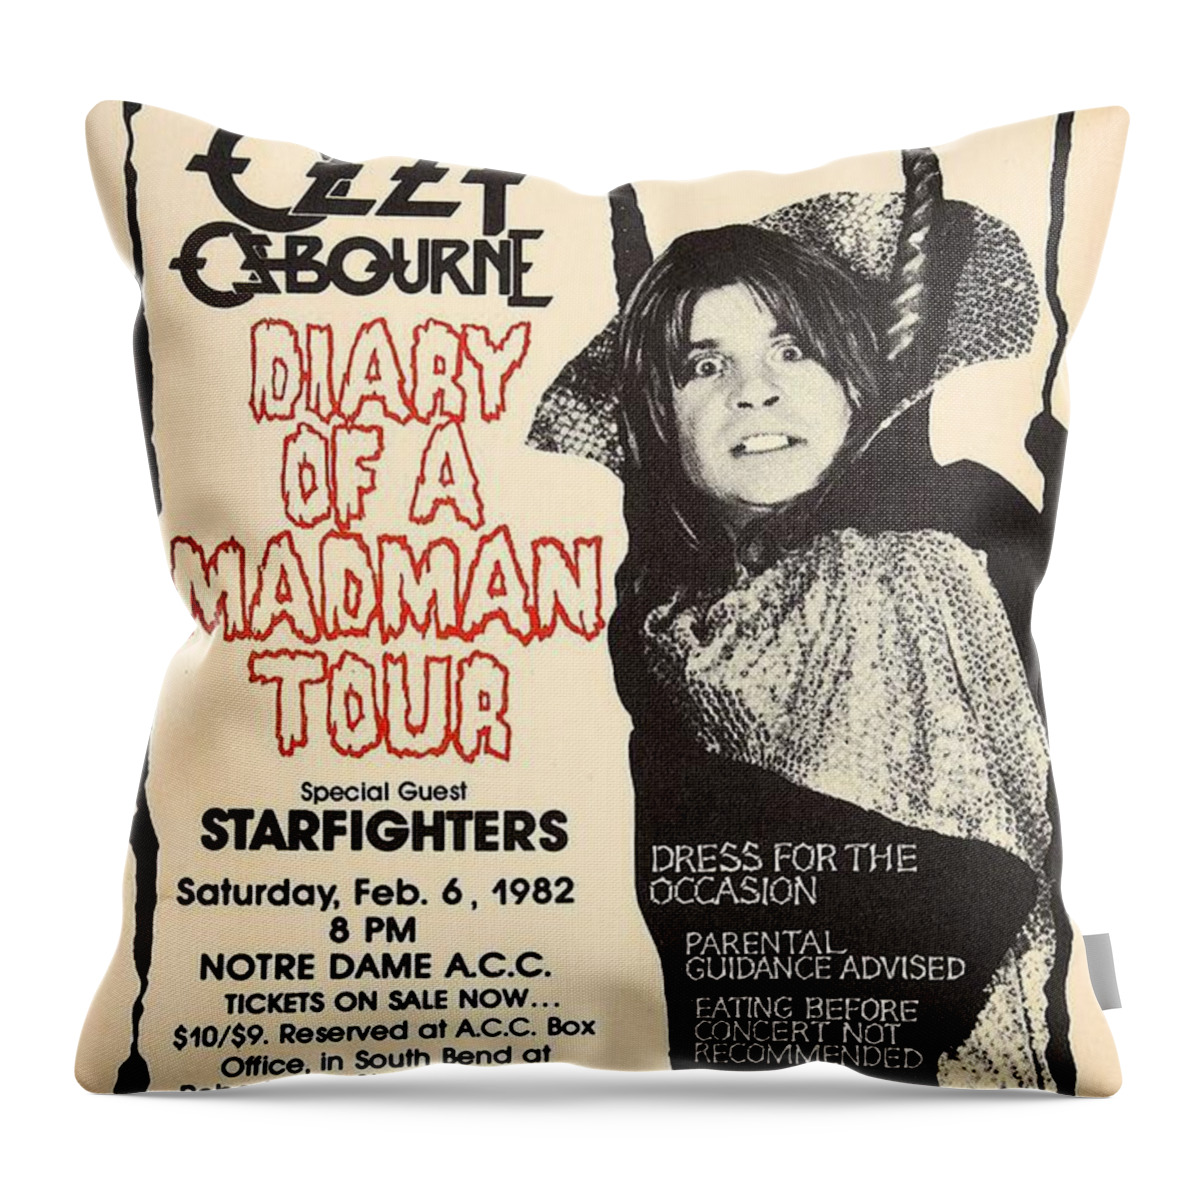 Ozzy Osbourne Vintage Music Poster Throw Pillow featuring the mixed media Ozzy Osbourne Vintage Music Poster by World Art Collective